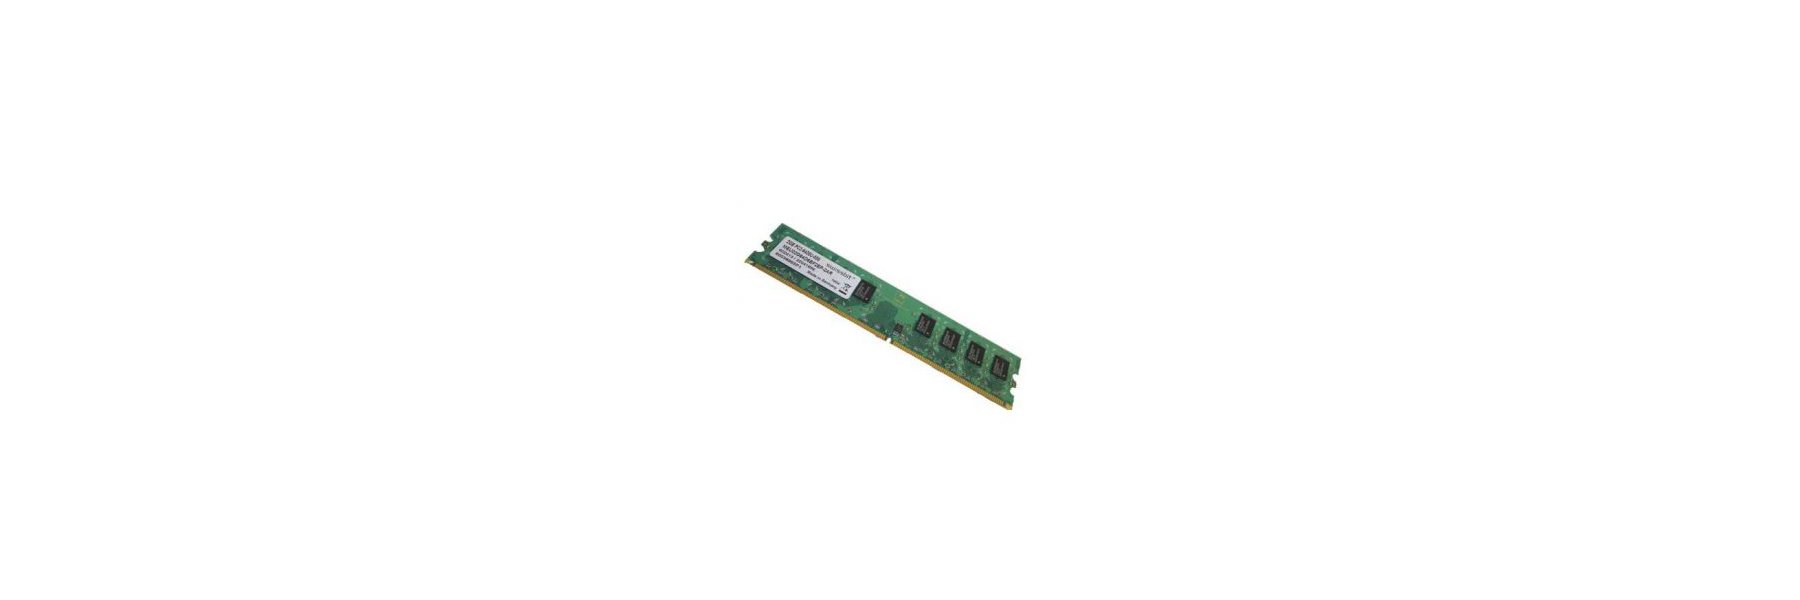 PC3-12800S / SO-DIMM